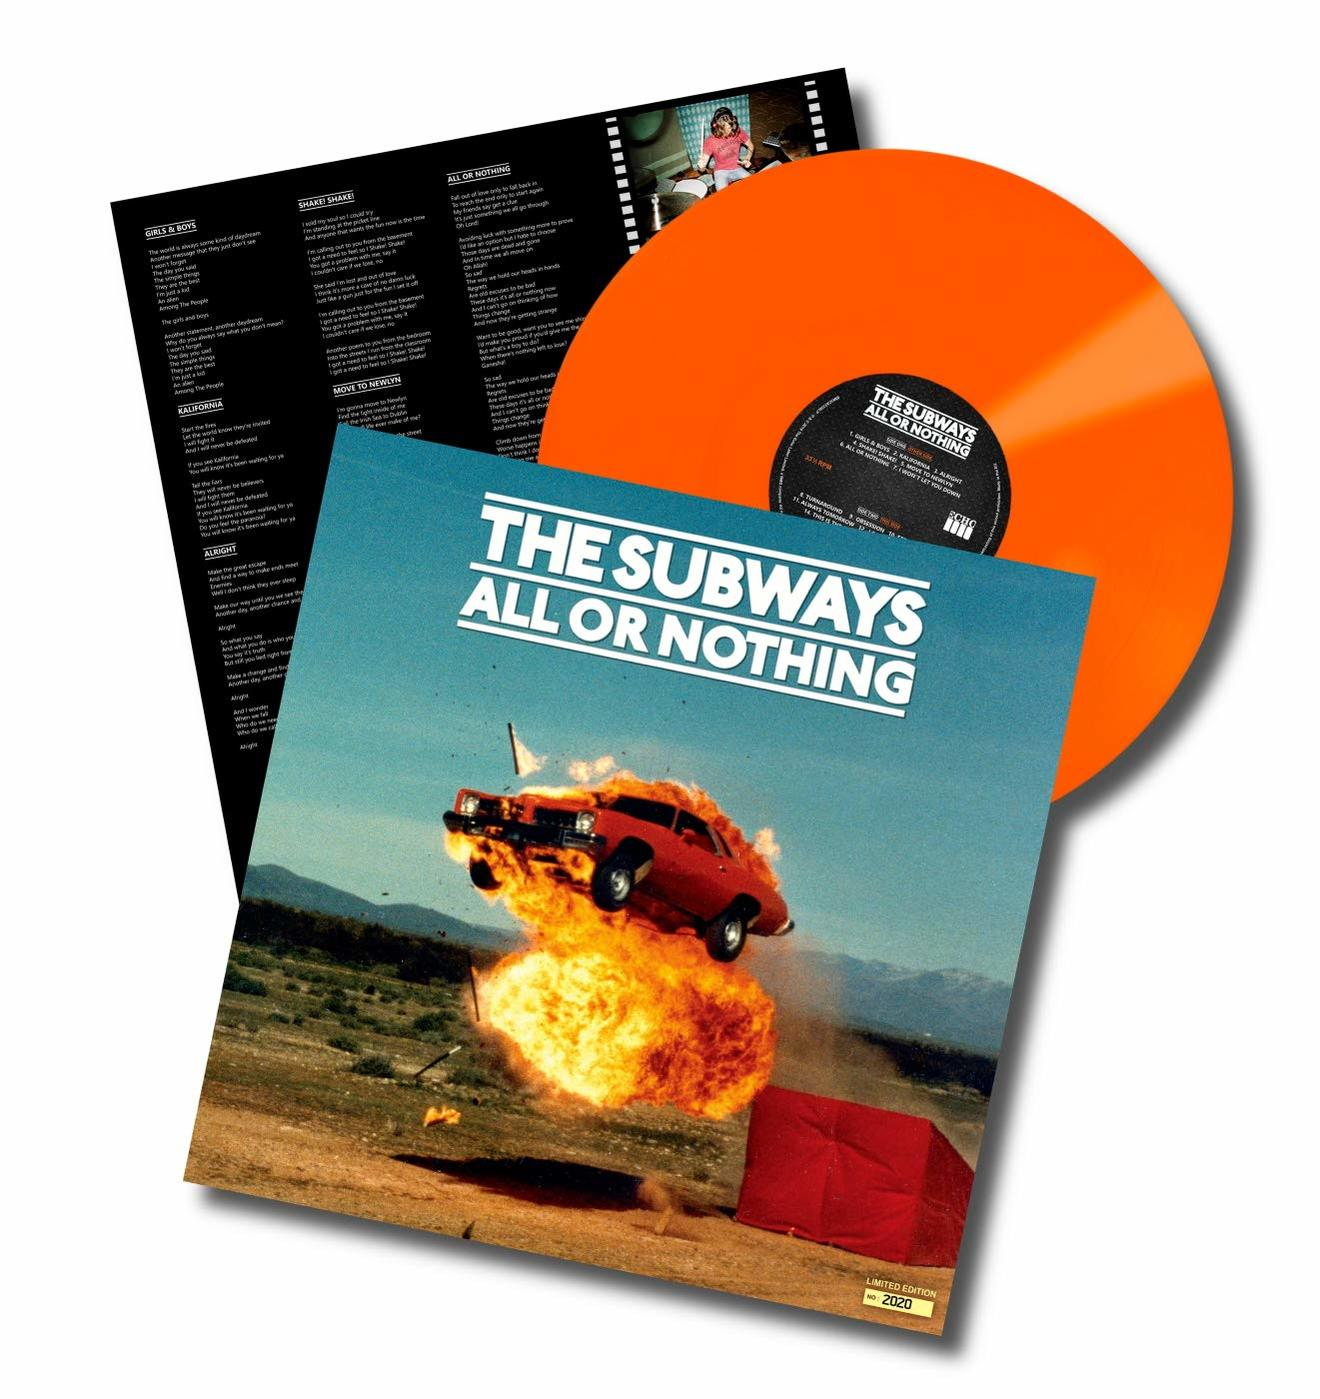 OR NOTHING ALL EDITION) (ANNIVERSARY - The Subways - (Vinyl)